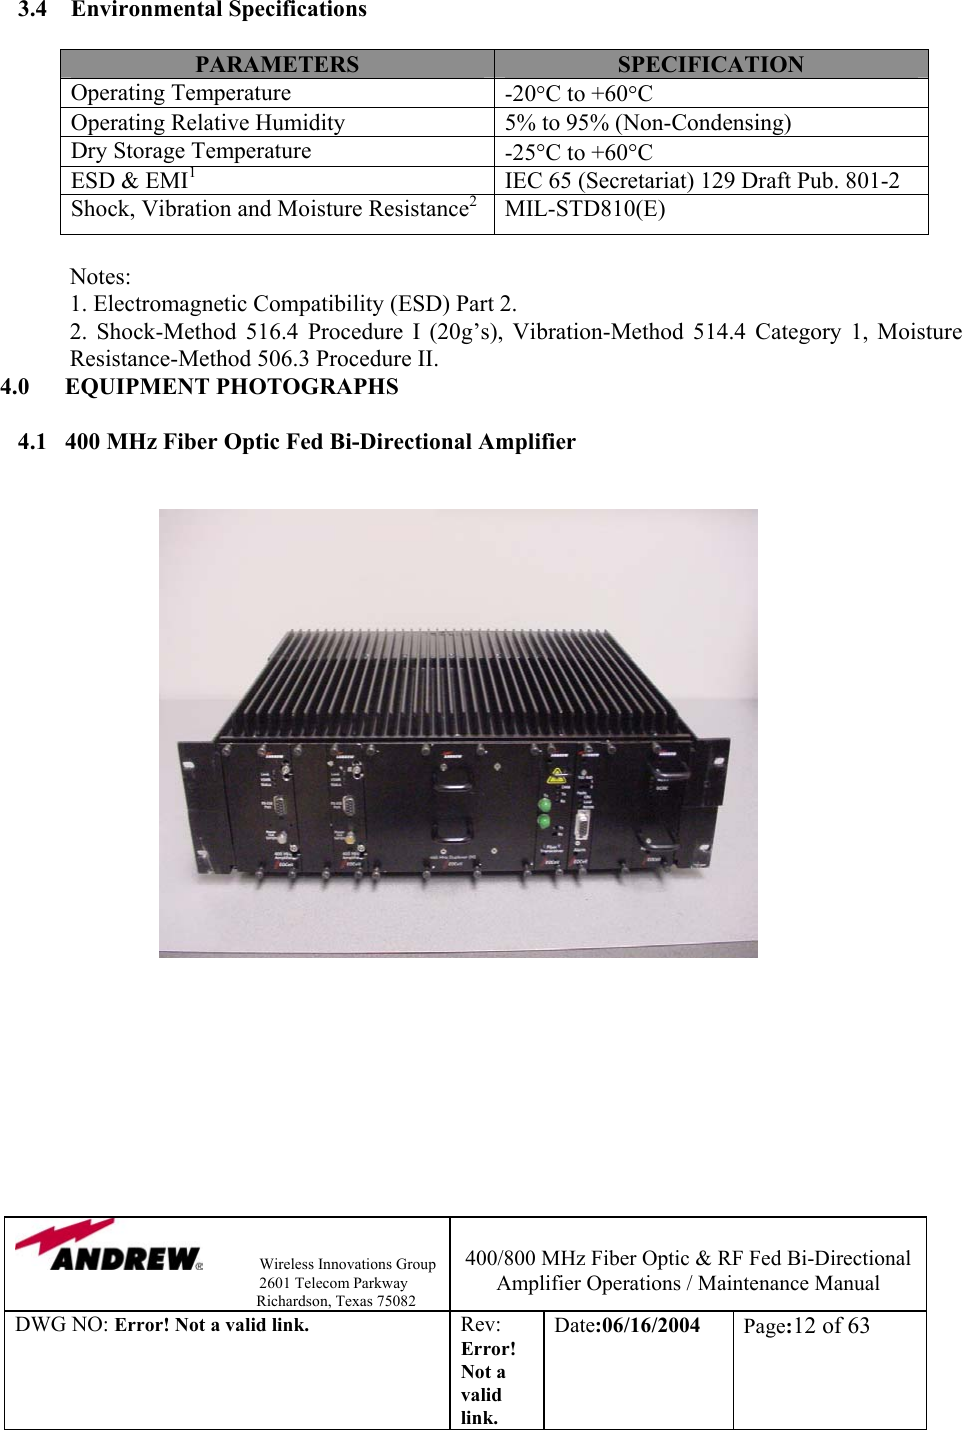                Wireless Innovations Group                                                                   2601 Telecom Parkway                                                         Richardson, Texas 75082  400/800 MHz Fiber Optic &amp; RF Fed Bi-Directional Amplifier Operations / Maintenance Manual DWG NO: Error! Not a valid link. Rev: Error! Not a valid link. Date:06/16/2004  Page:12 of 63  3.4    Environmental Specifications  PARAMETERS  SPECIFICATION Operating Temperature   -20°C to +60°C Operating Relative Humidity  5% to 95% (Non-Condensing) Dry Storage Temperature  -25°C to +60°C  ESD &amp; EMI1  IEC 65 (Secretariat) 129 Draft Pub. 801-2 Shock, Vibration and Moisture Resistance2 MIL-STD810(E)  Notes:             1. Electromagnetic Compatibility (ESD) Part 2.   2. Shock-Method 516.4 Procedure I (20g’s), Vibration-Method 514.4 Category 1, Moisture Resistance-Method 506.3 Procedure II.                4.0      EQUIPMENT PHOTOGRAPHS  4.1   400 MHz Fiber Optic Fed Bi-Directional Amplifier                                    